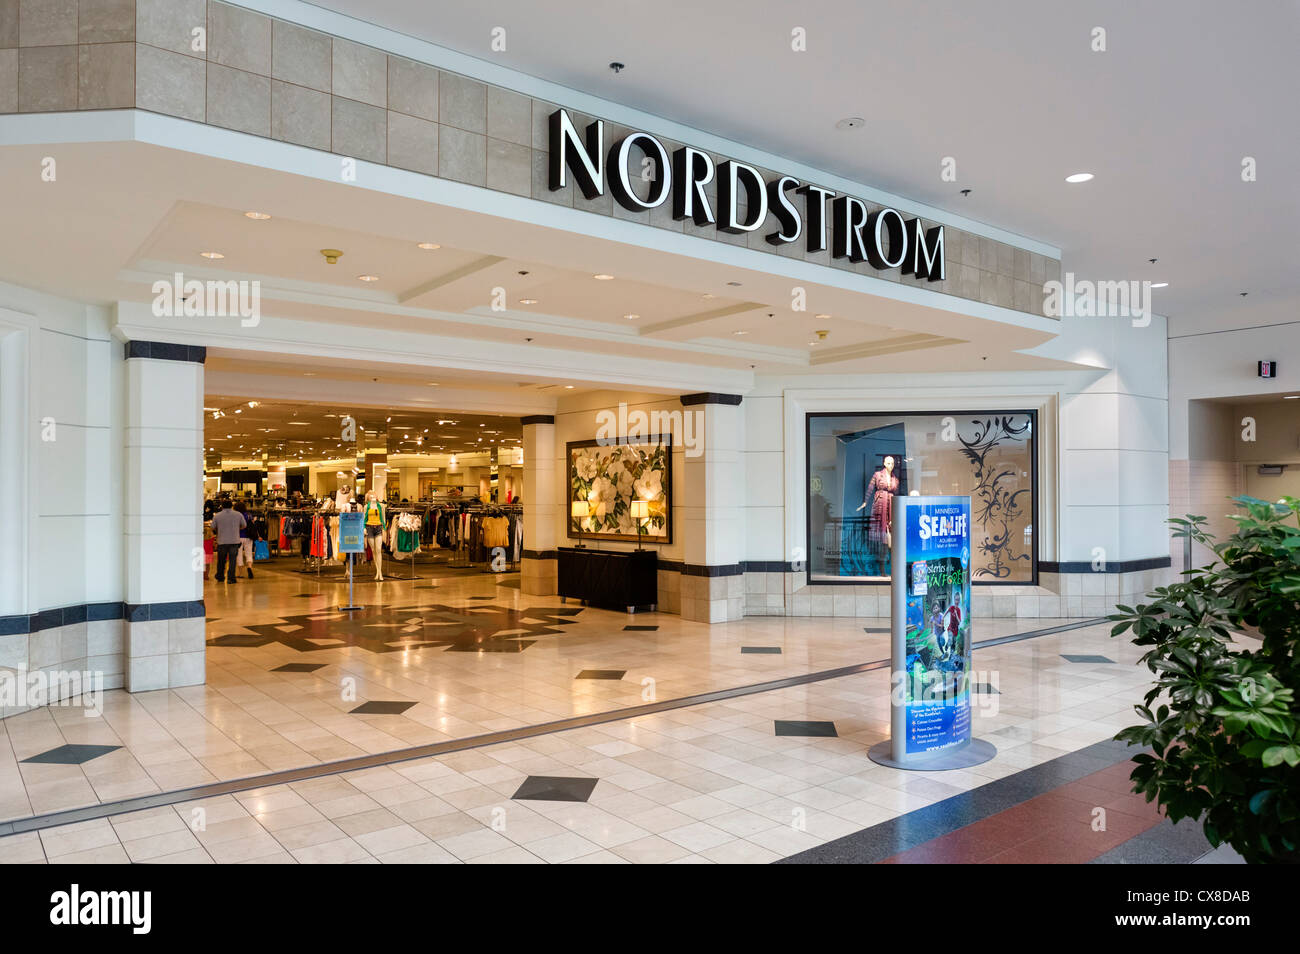 Nordstrom department store in the Mall of America, Bloomington, Minneapolis, Minnesota, USA Stock Photo